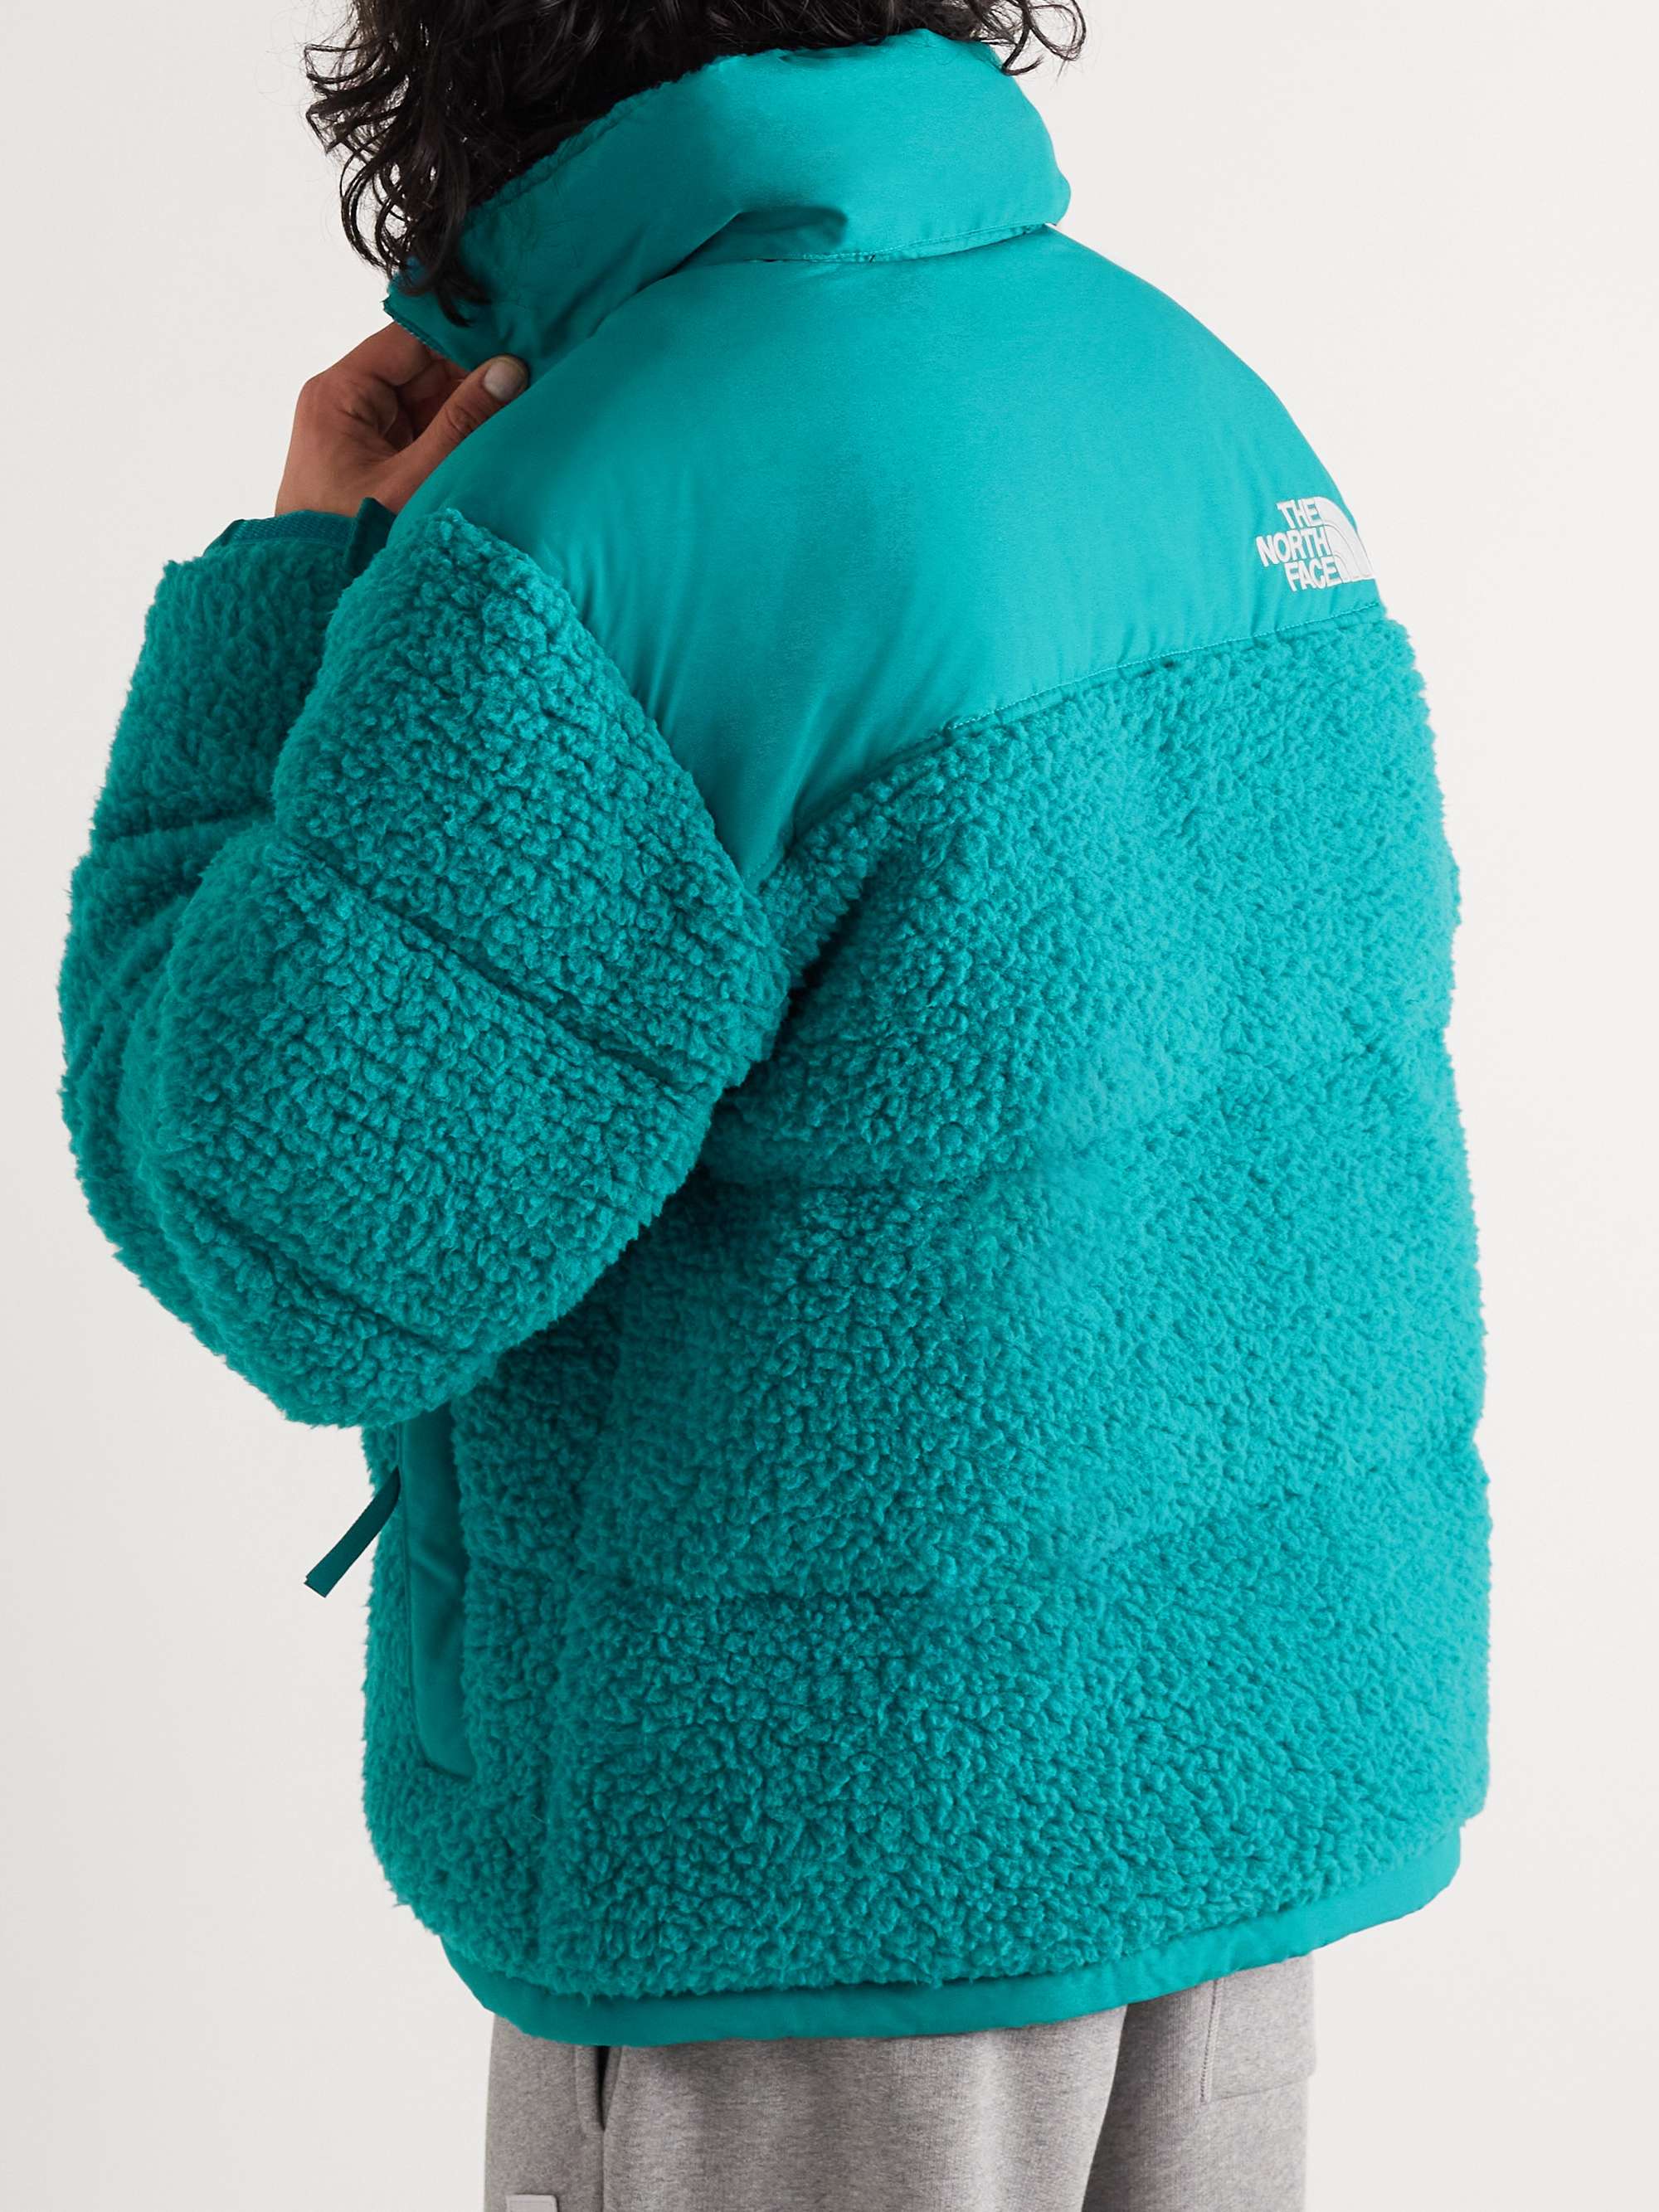 THE NORTH FACE Nuptse Quilted Recycled Fleece and Shell Hooded Down Jacket